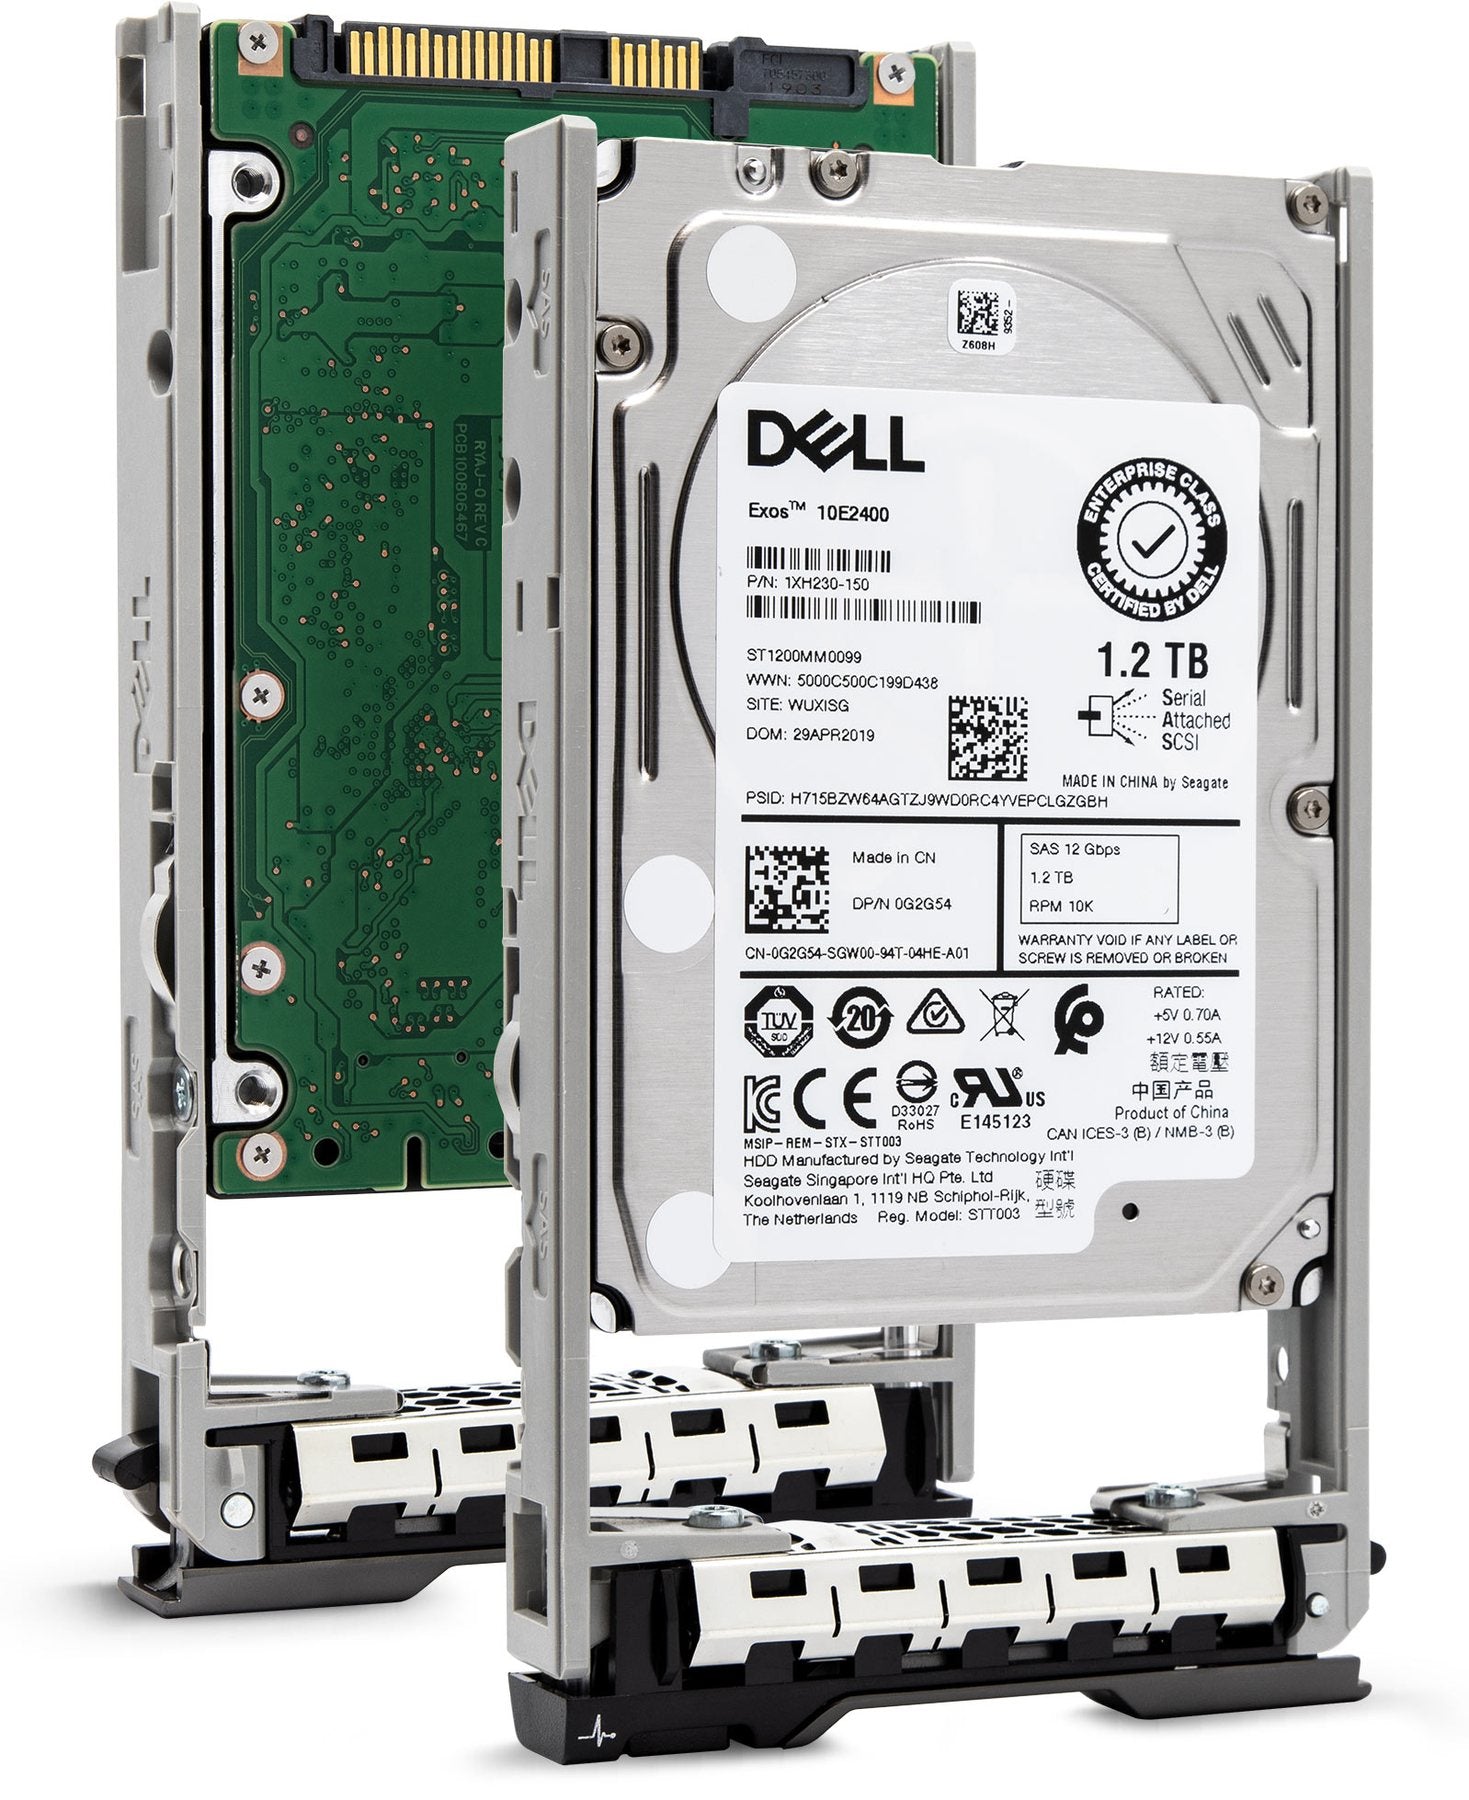 Dell G13 0GK8MY 1.2TB 10K RPM SAS 12Gb/s 512n 2.5" Manufacturer Recertified HDD